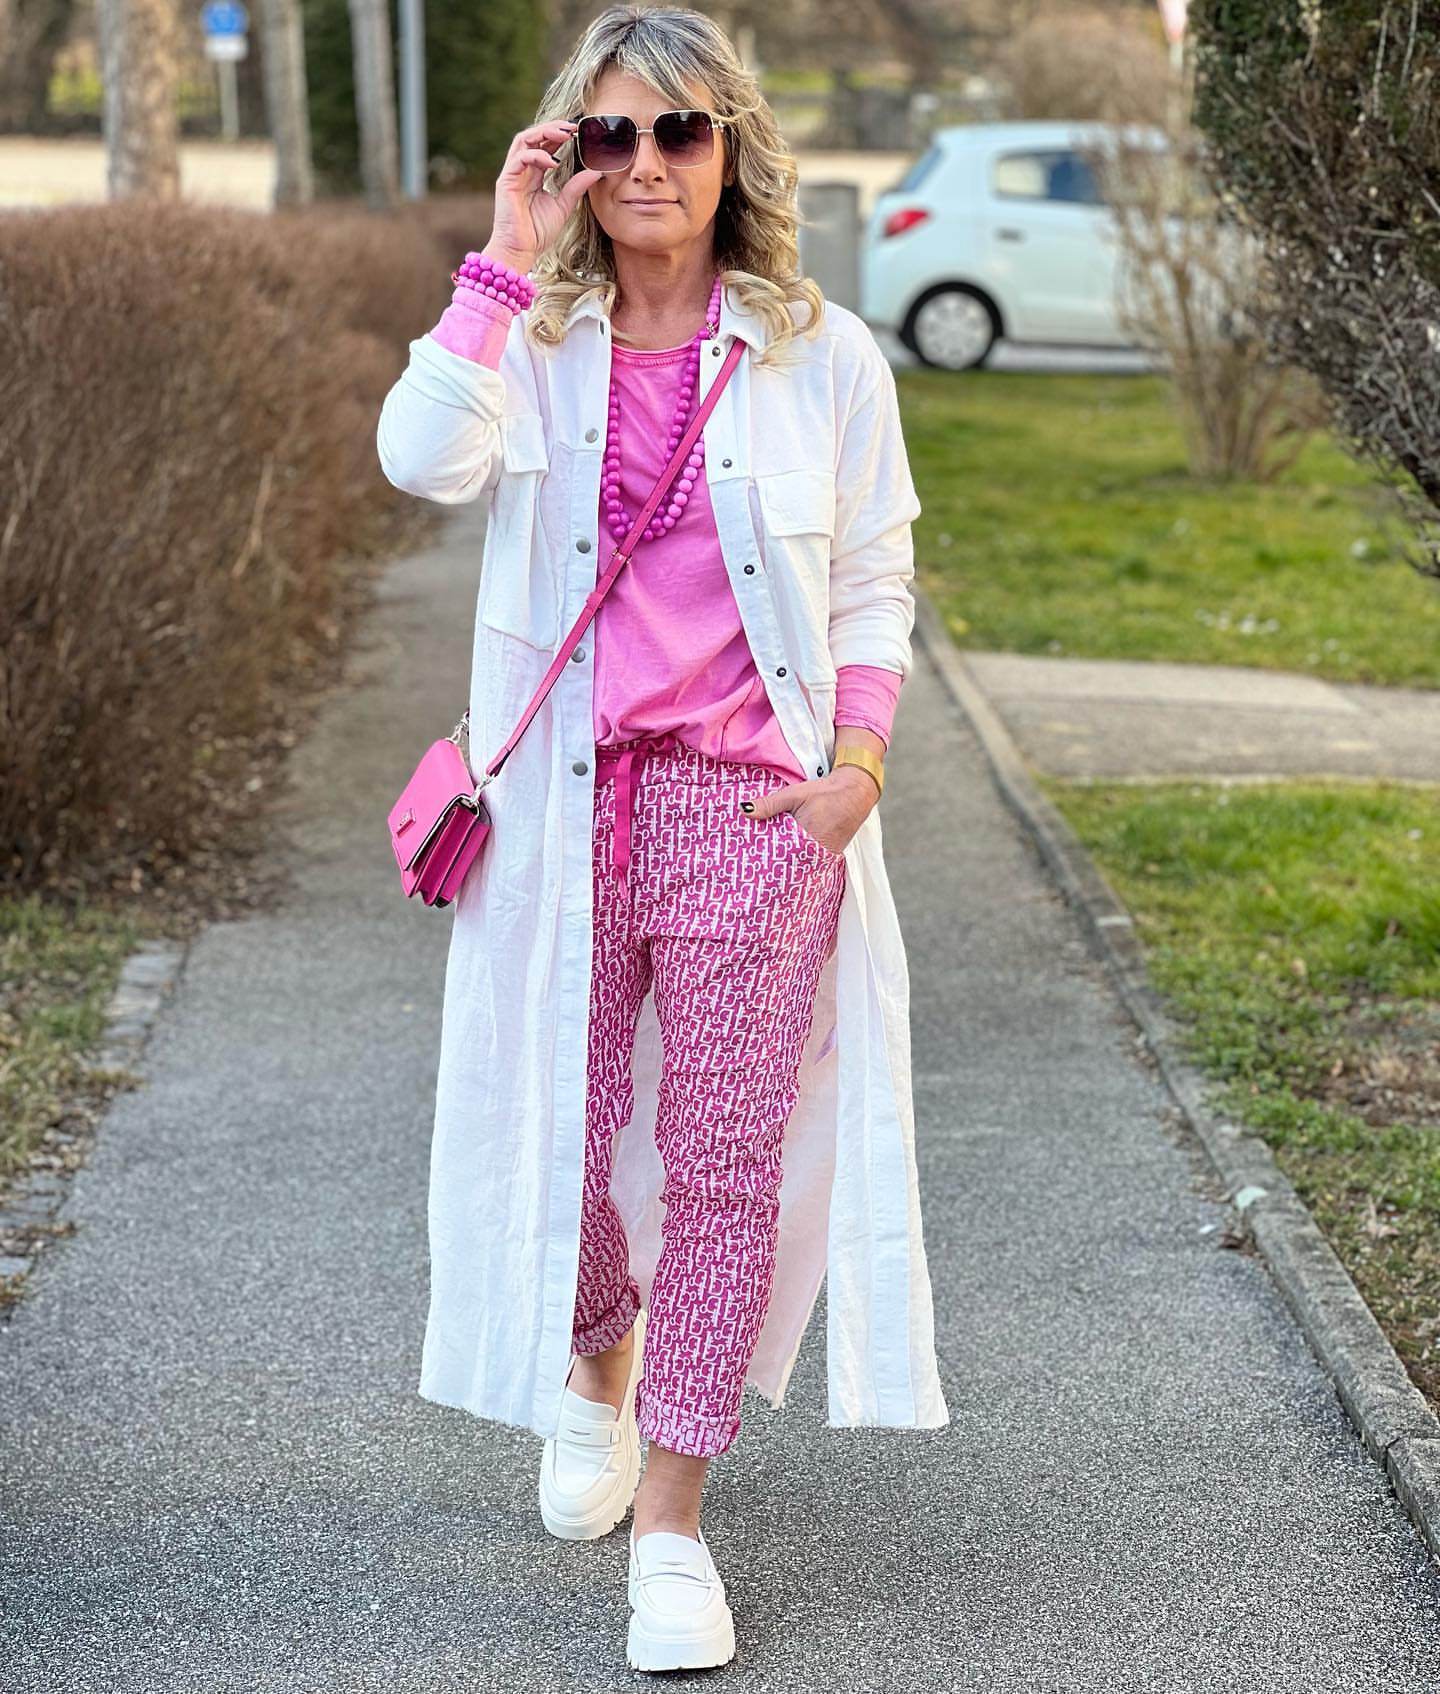 Outfits for Women Over 50 4